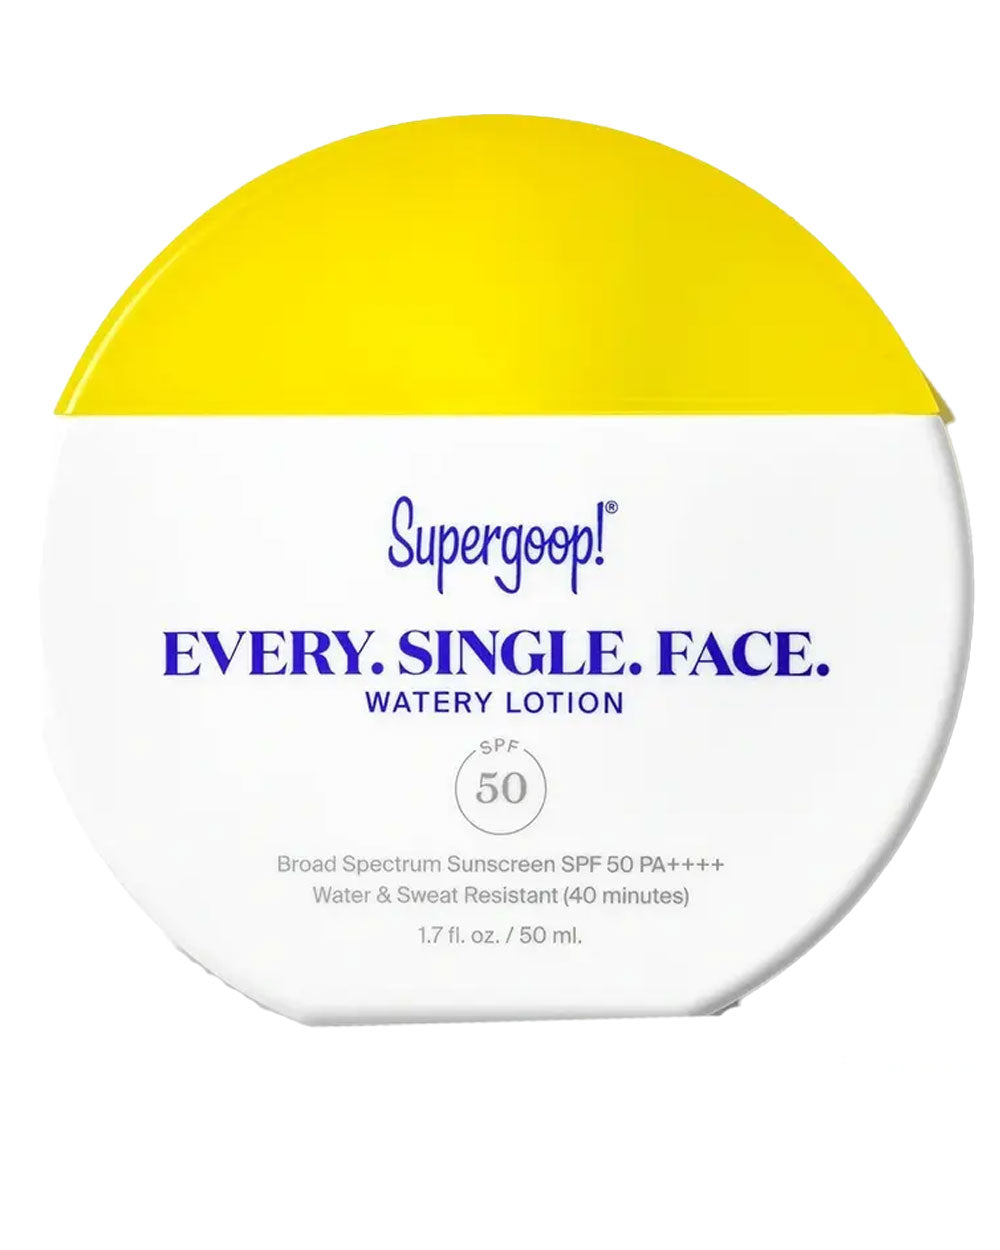 Every Single Face Watery Lotion SPF 50